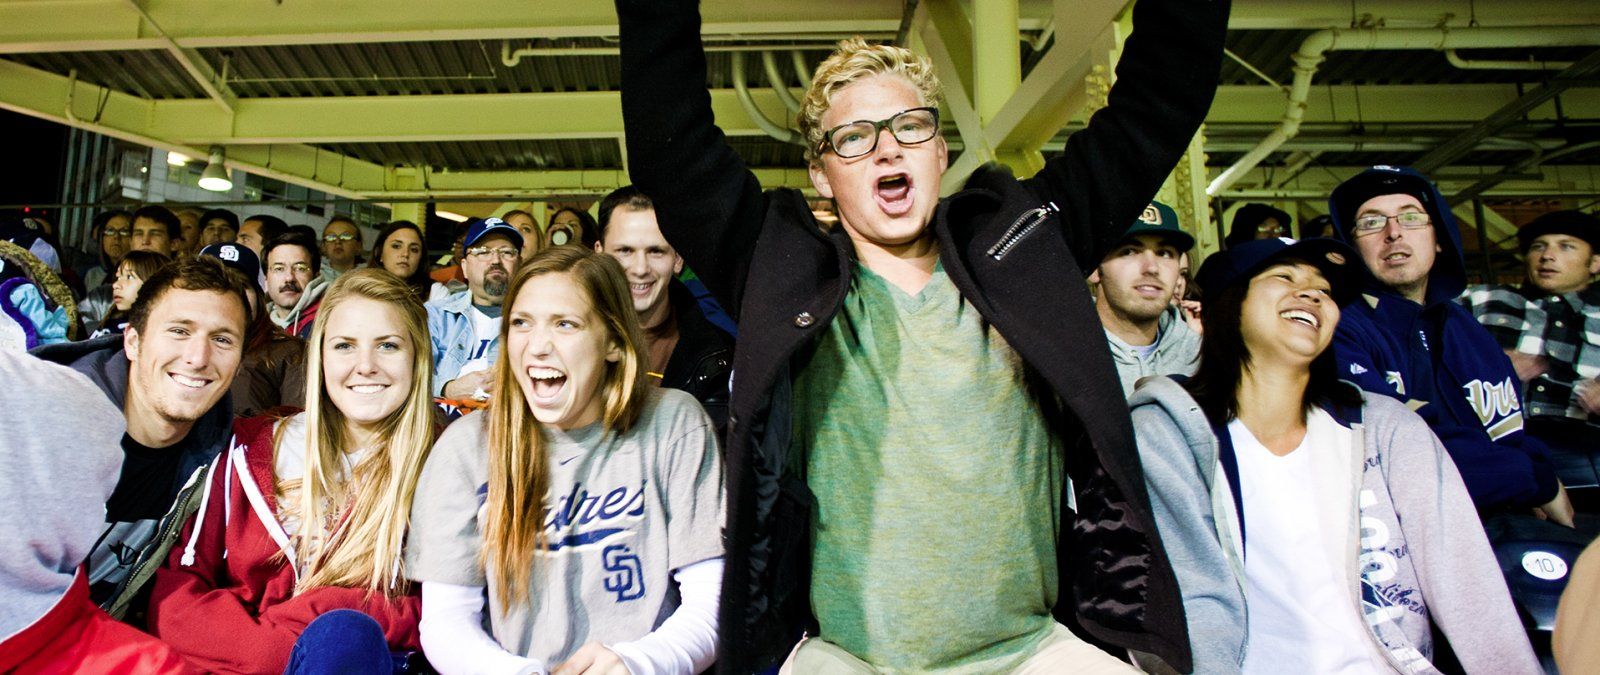 Transfer student scream for the Padres at Petco Park